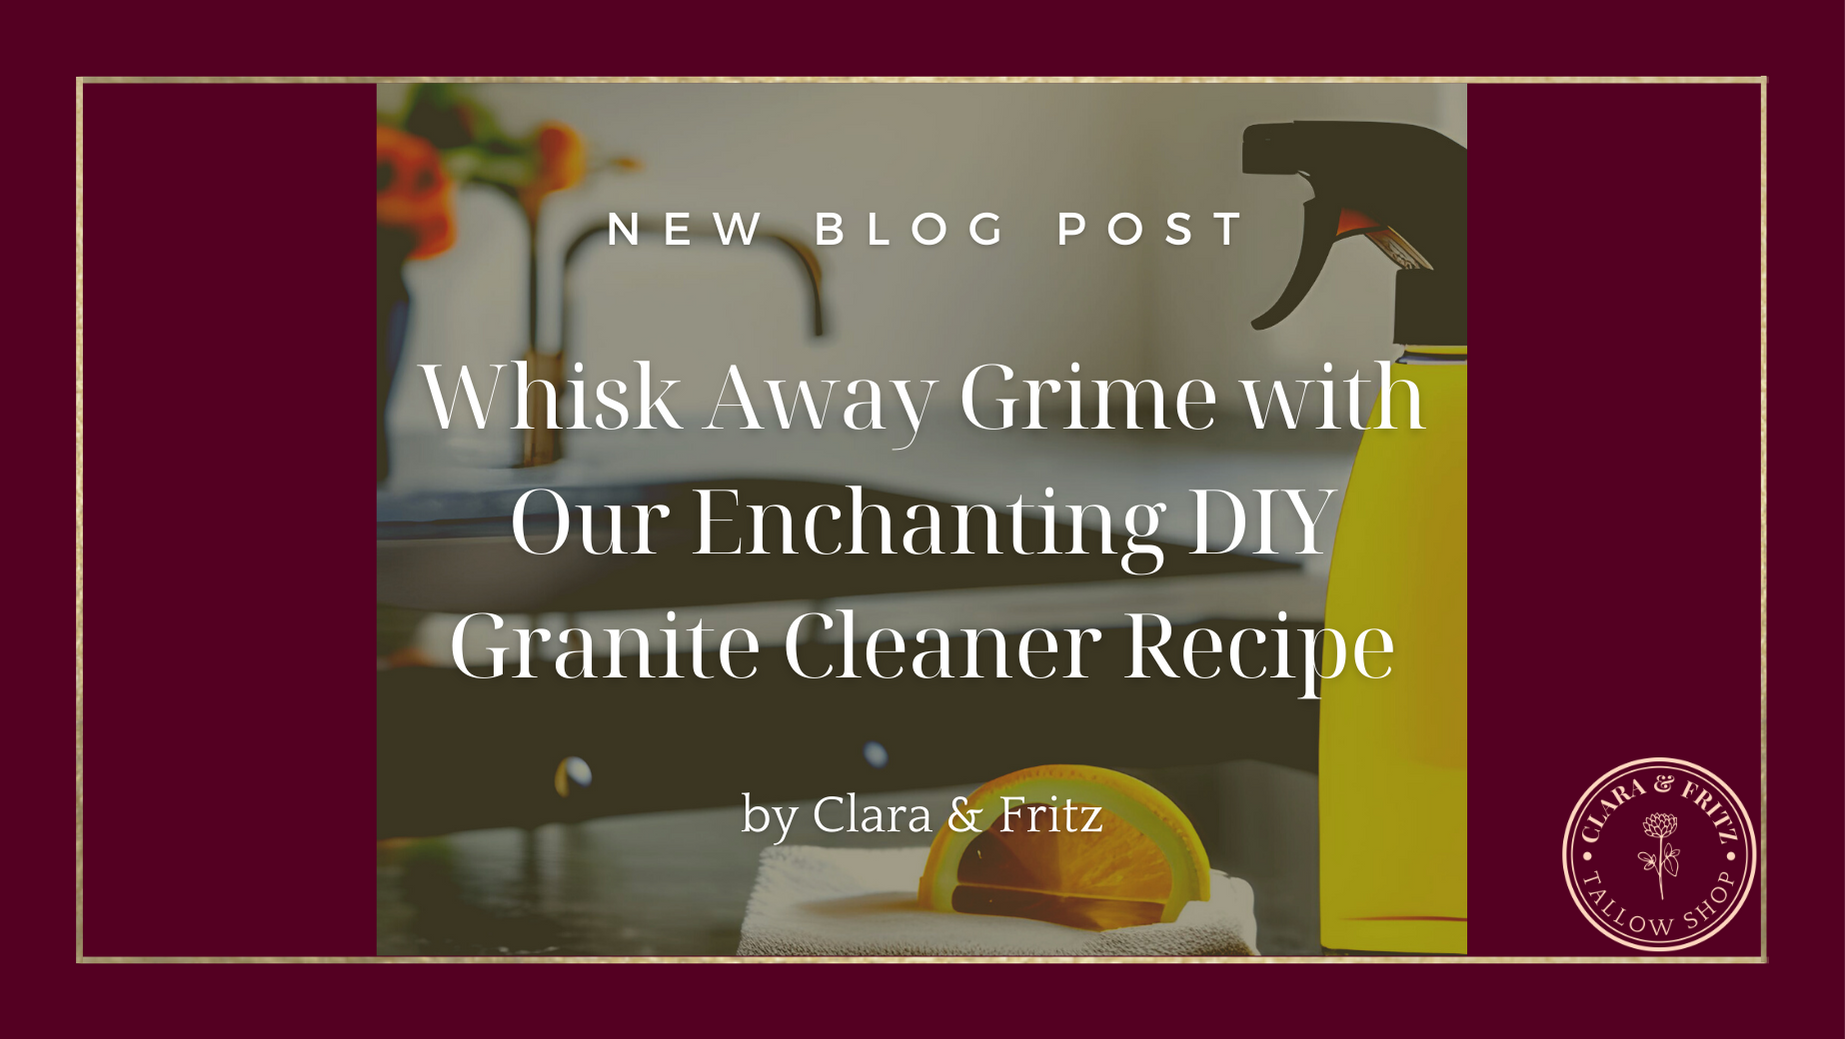 Whisk Away Grime with Our Enchanting DIY Granite Cleaner Recipe